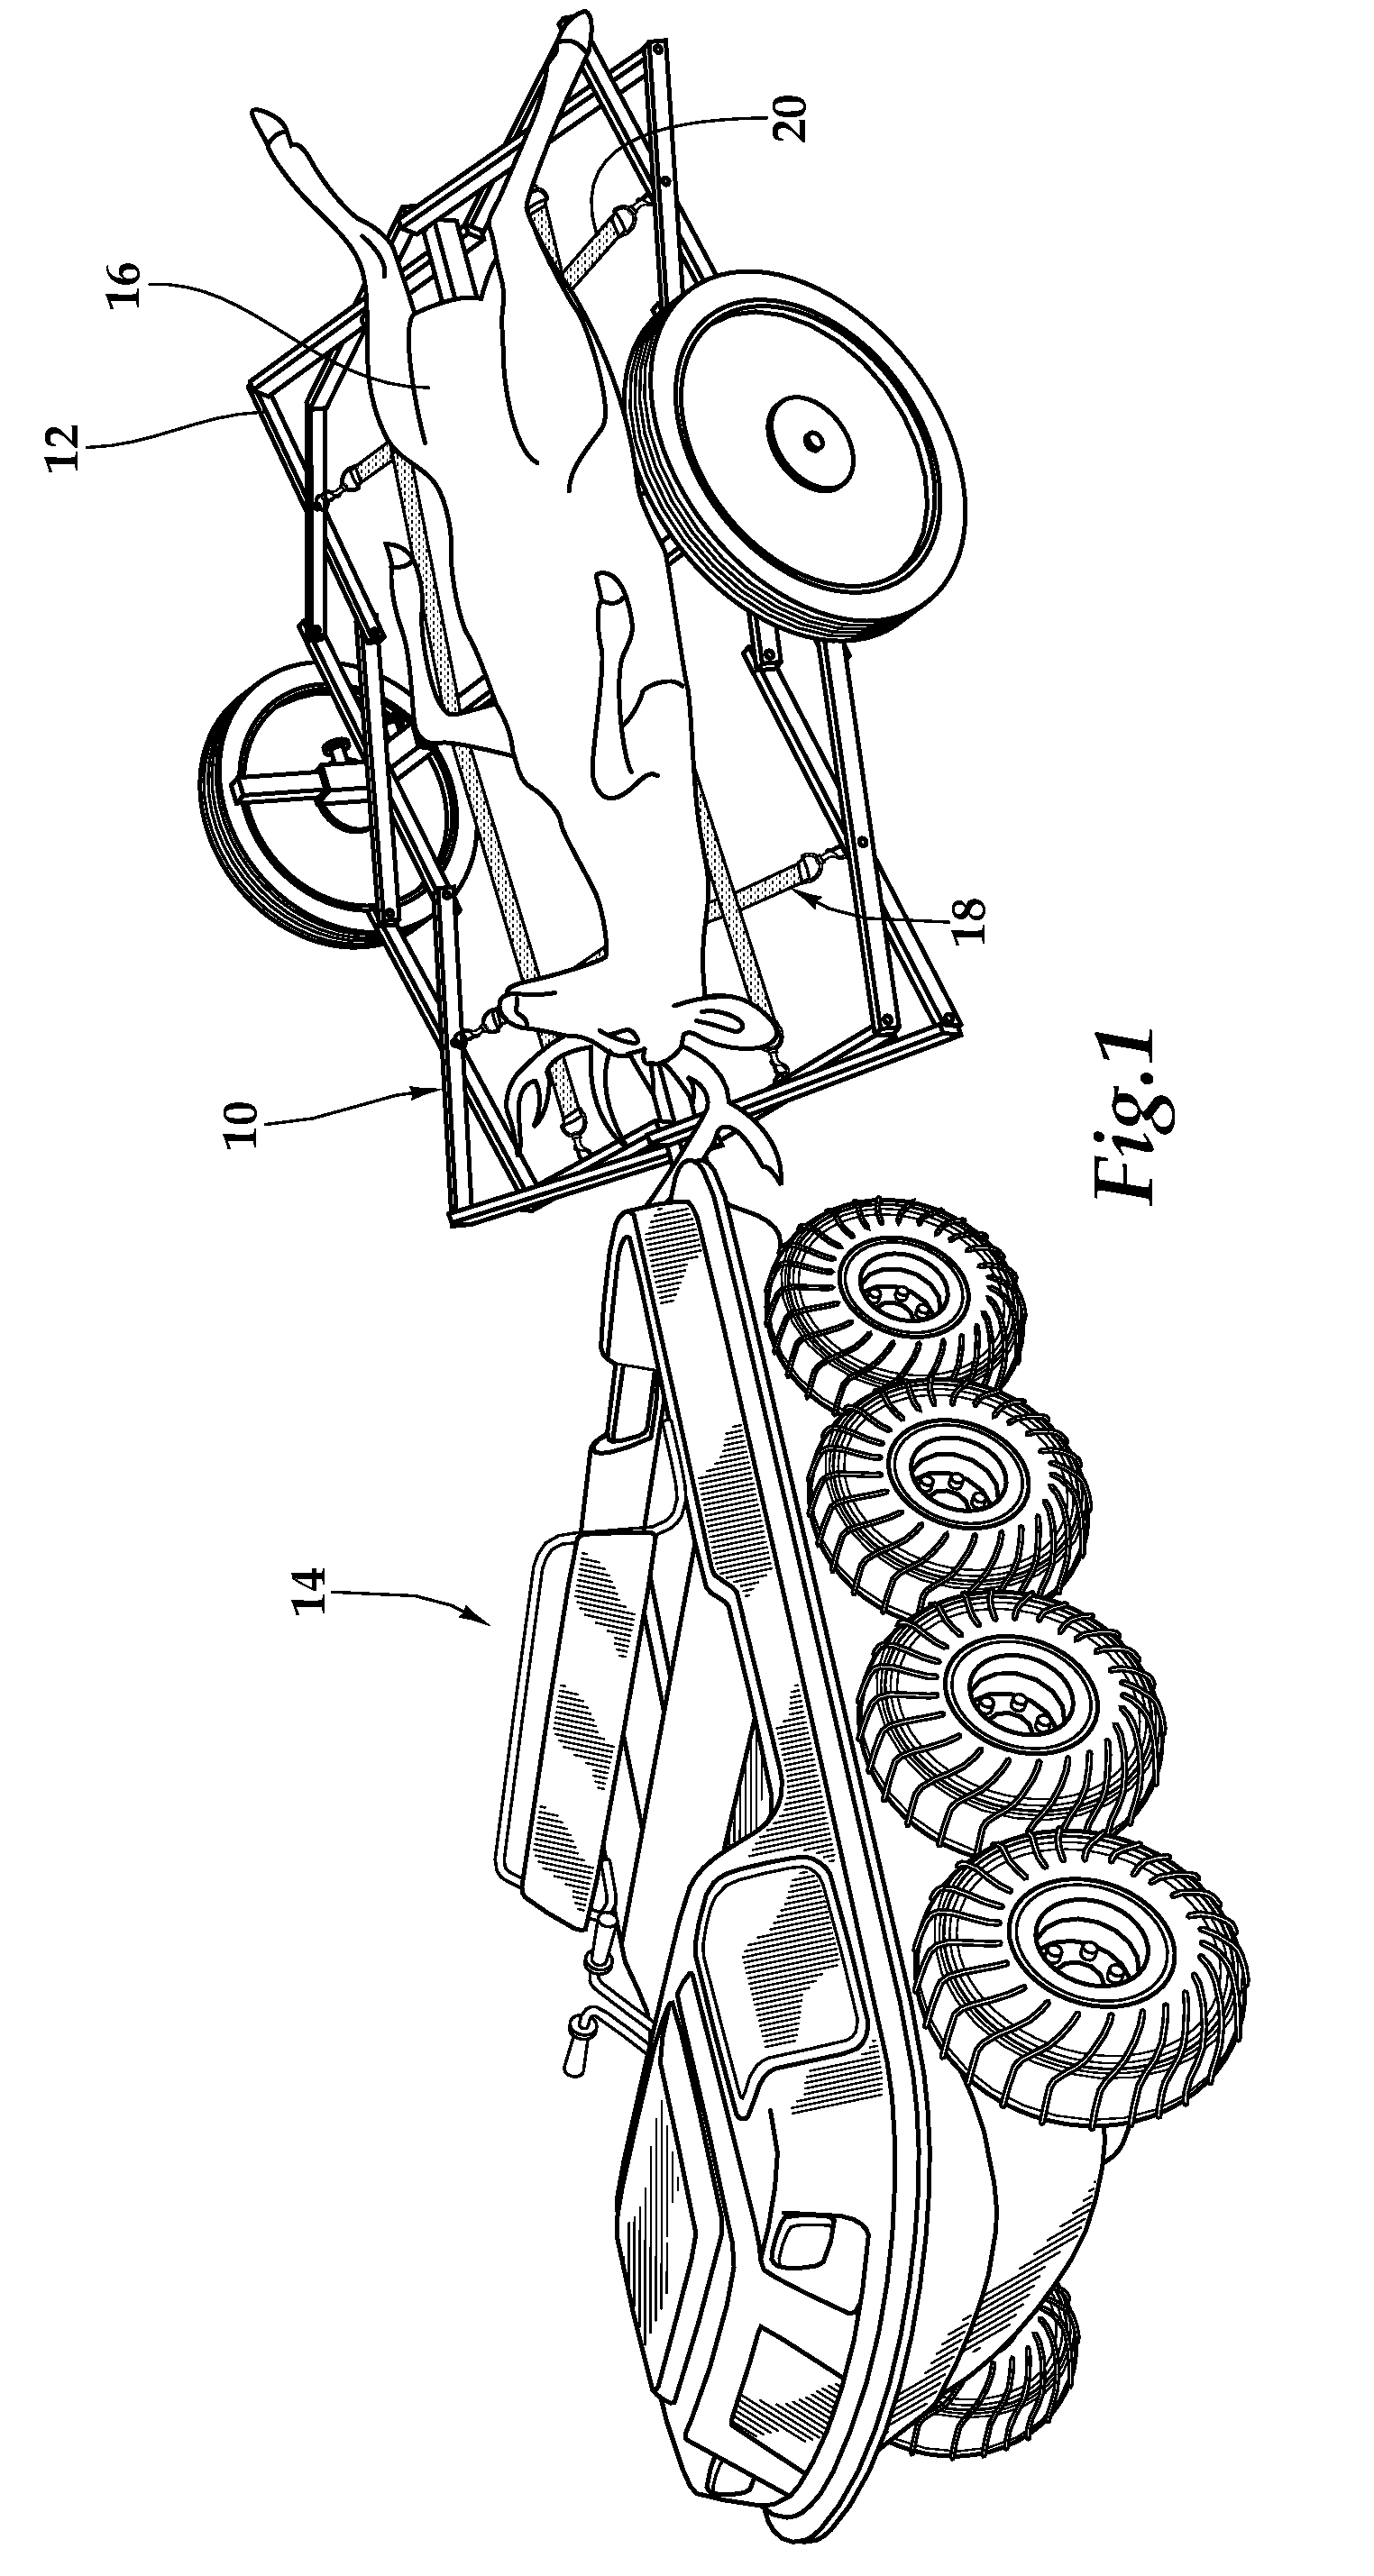 Collapsible Trailer and Method for Use of Same